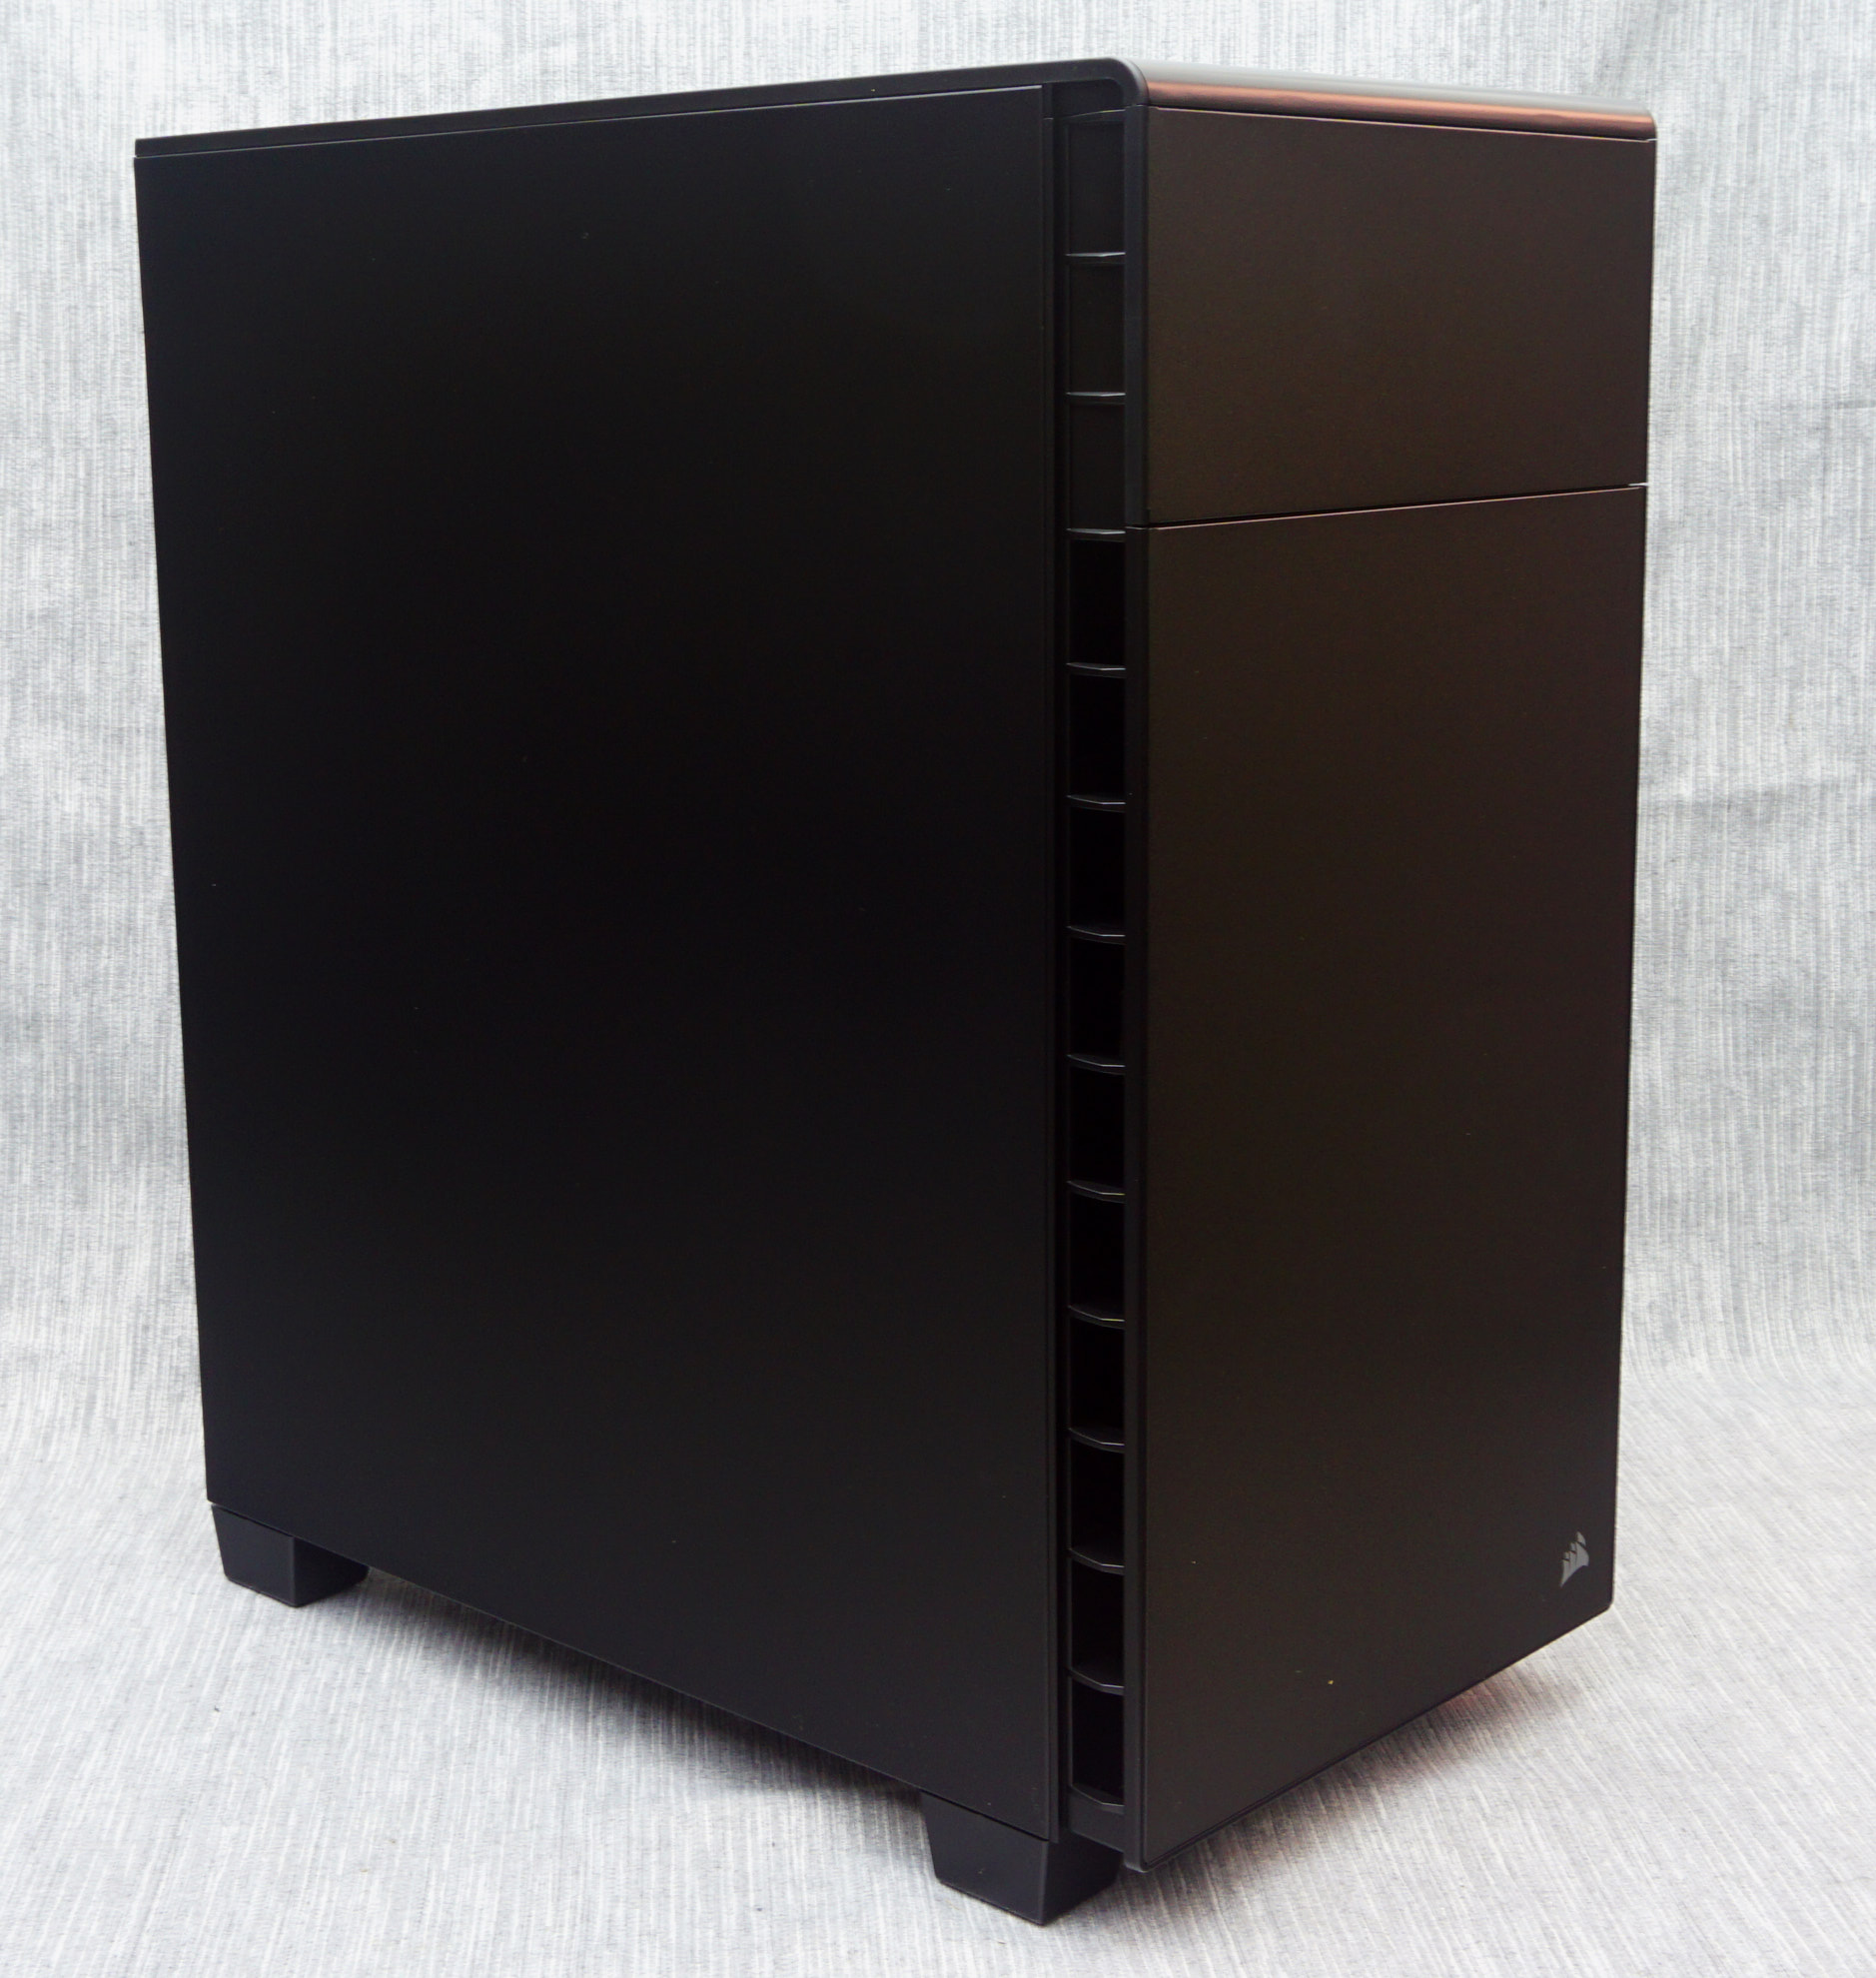 The Corsair Carbide 600Q Case Upside Down But Right On